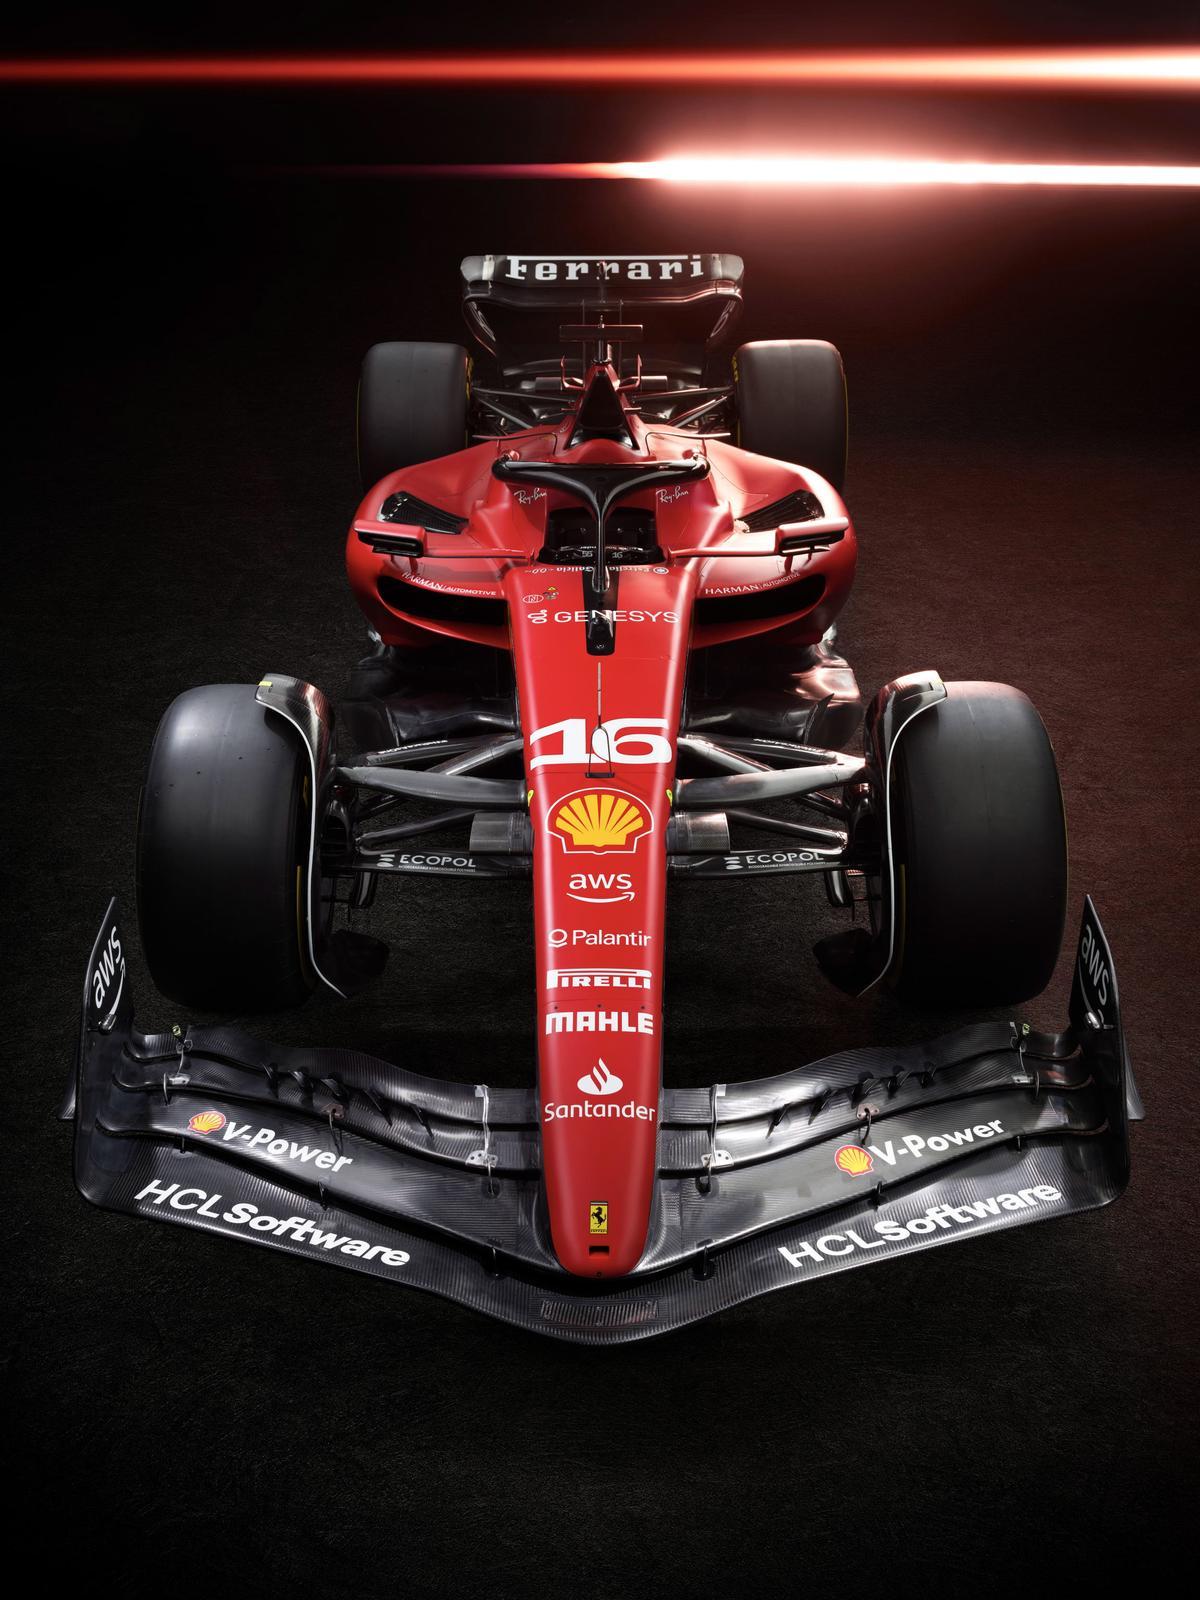 Maranello (Italy), 14/02/2023.- A handout photo made available by the Scuderia Ferrari press office shows the new Ferrari SF-23 Formula One race car during its presentation in Maranello, Italy, 14 February 2023. (Fórmula Uno, Italia) EFE/EPA/SCUDERIA FERRARI PRESS OFICE HANDOUT HANDOUT EDITORIAL USE ONLY/NO SALES